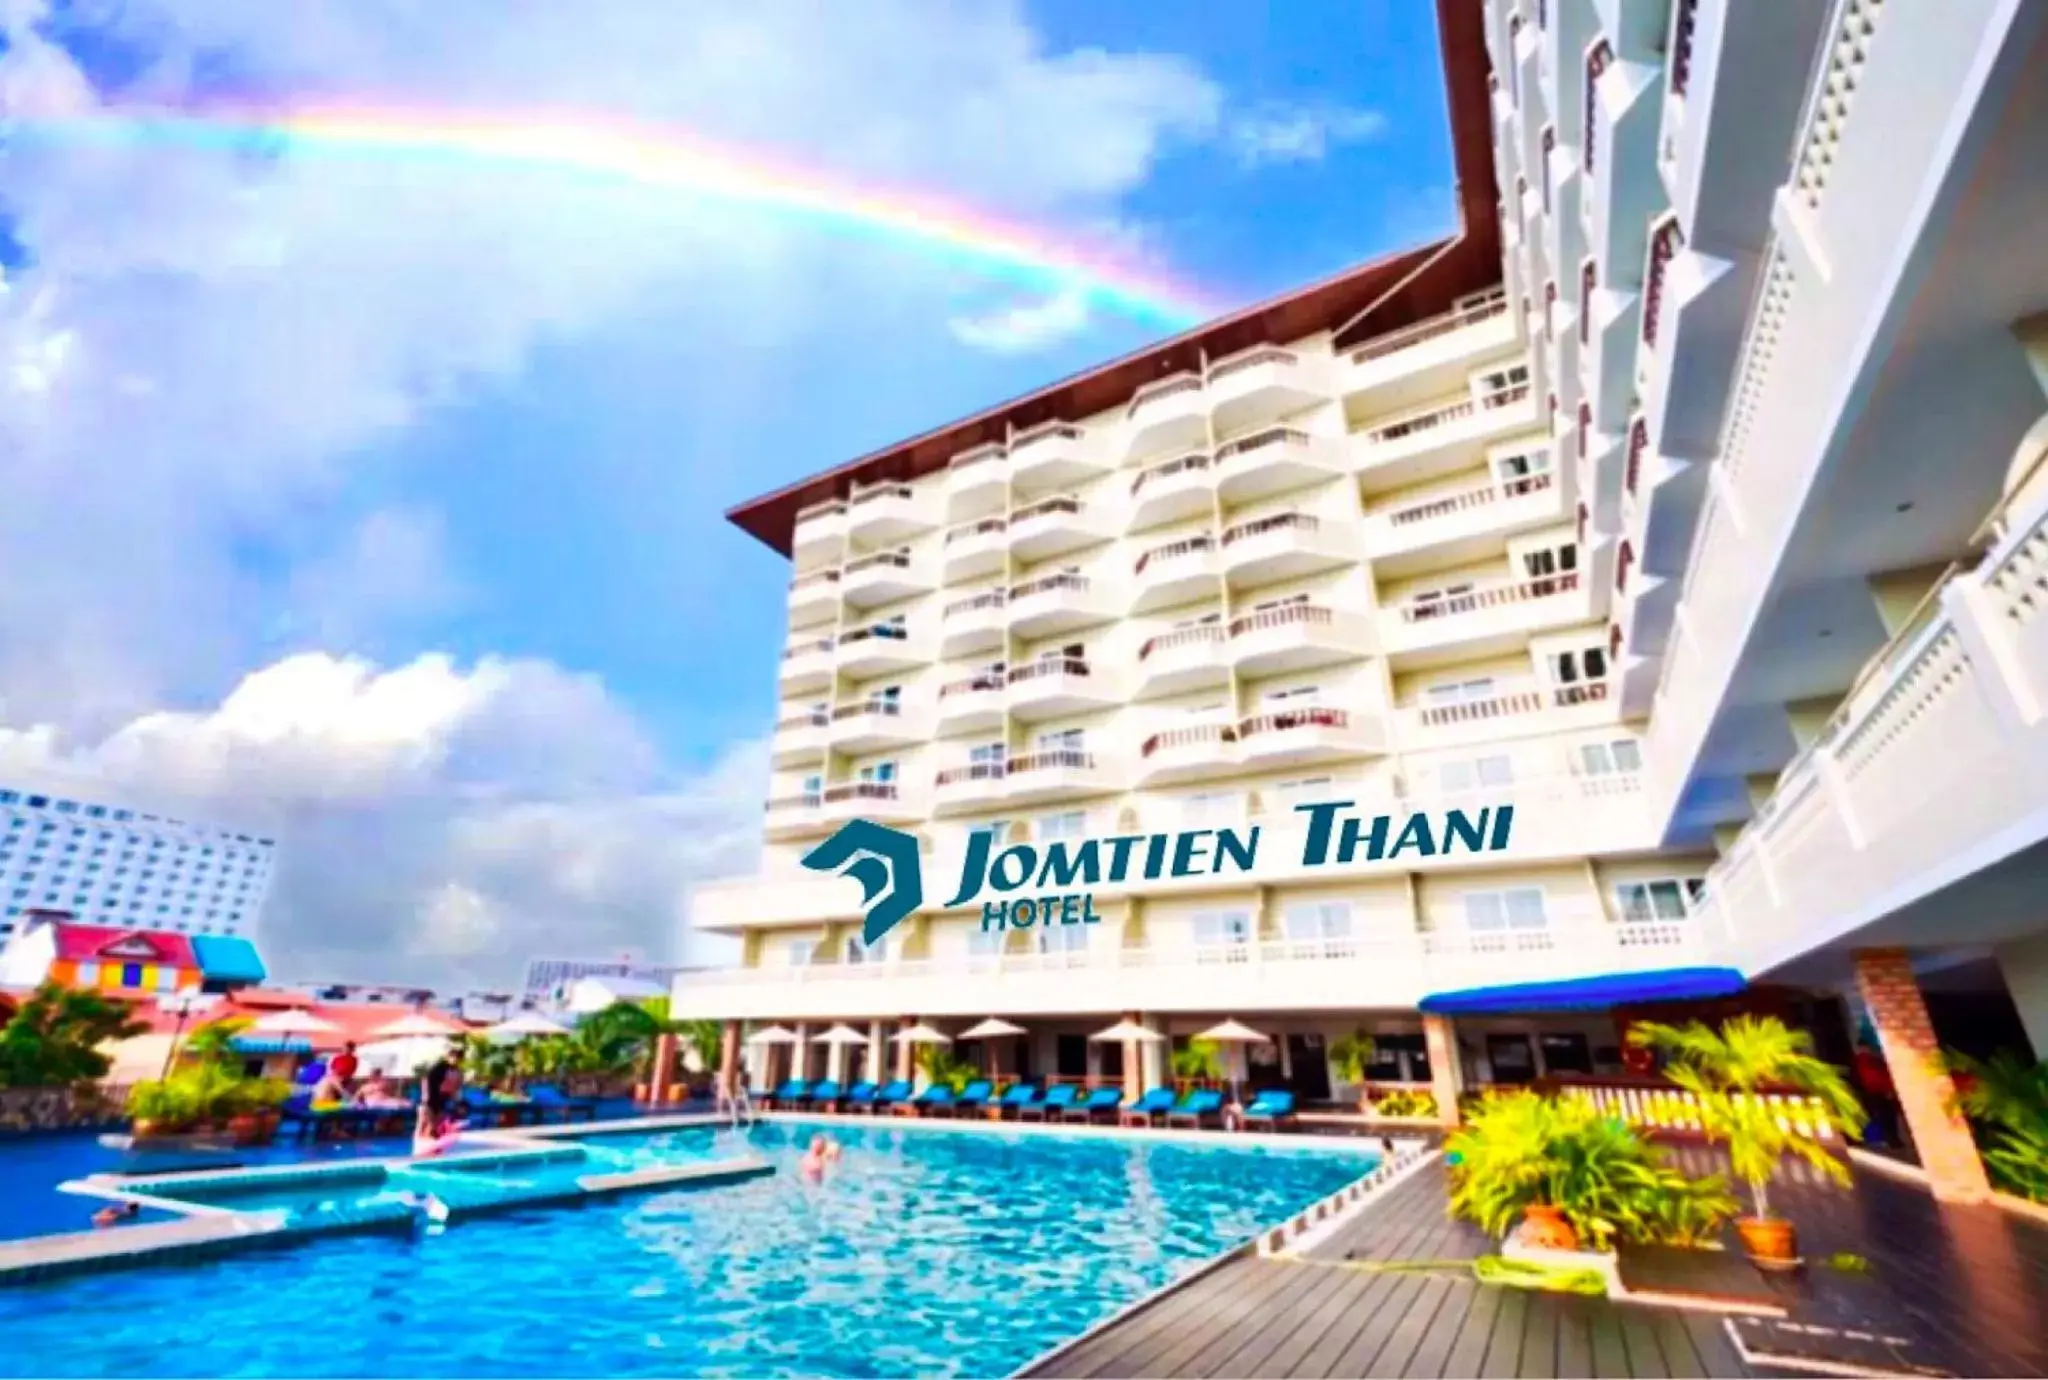 Property building, Swimming Pool in Jomtien Thani Hotel